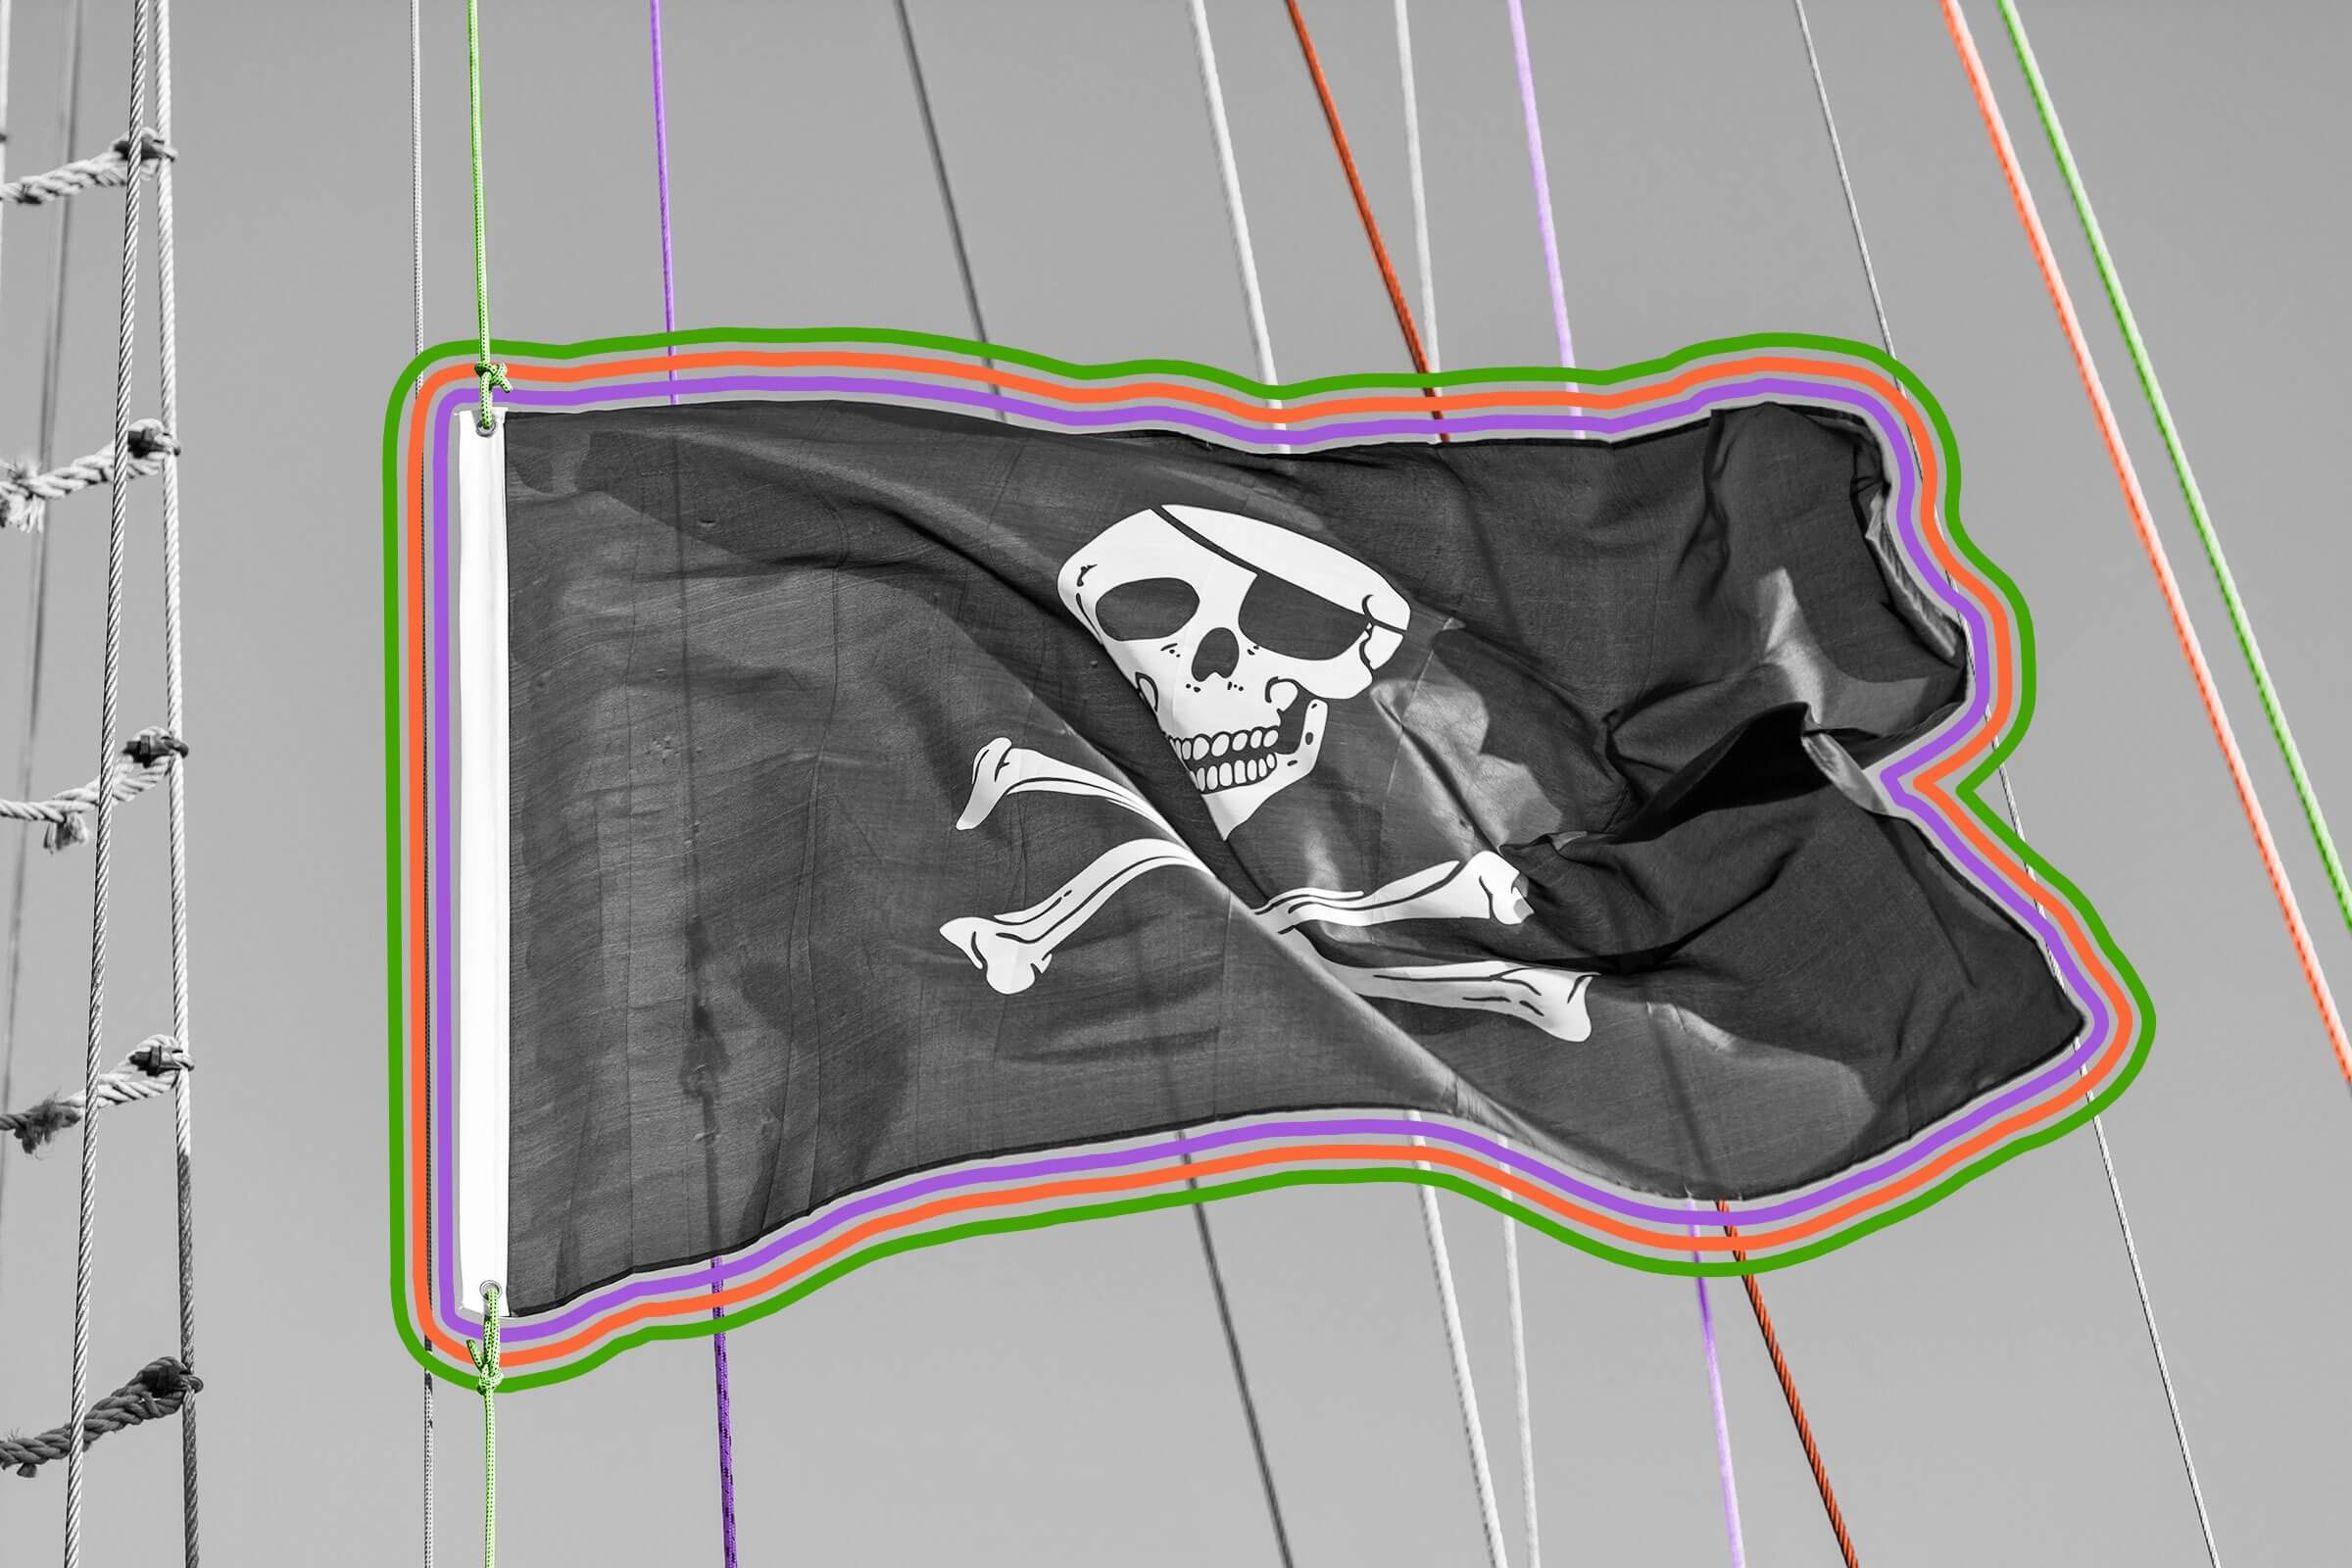 Only one ship of the U.S. Navy is authorized to fly the Jolly Roger.